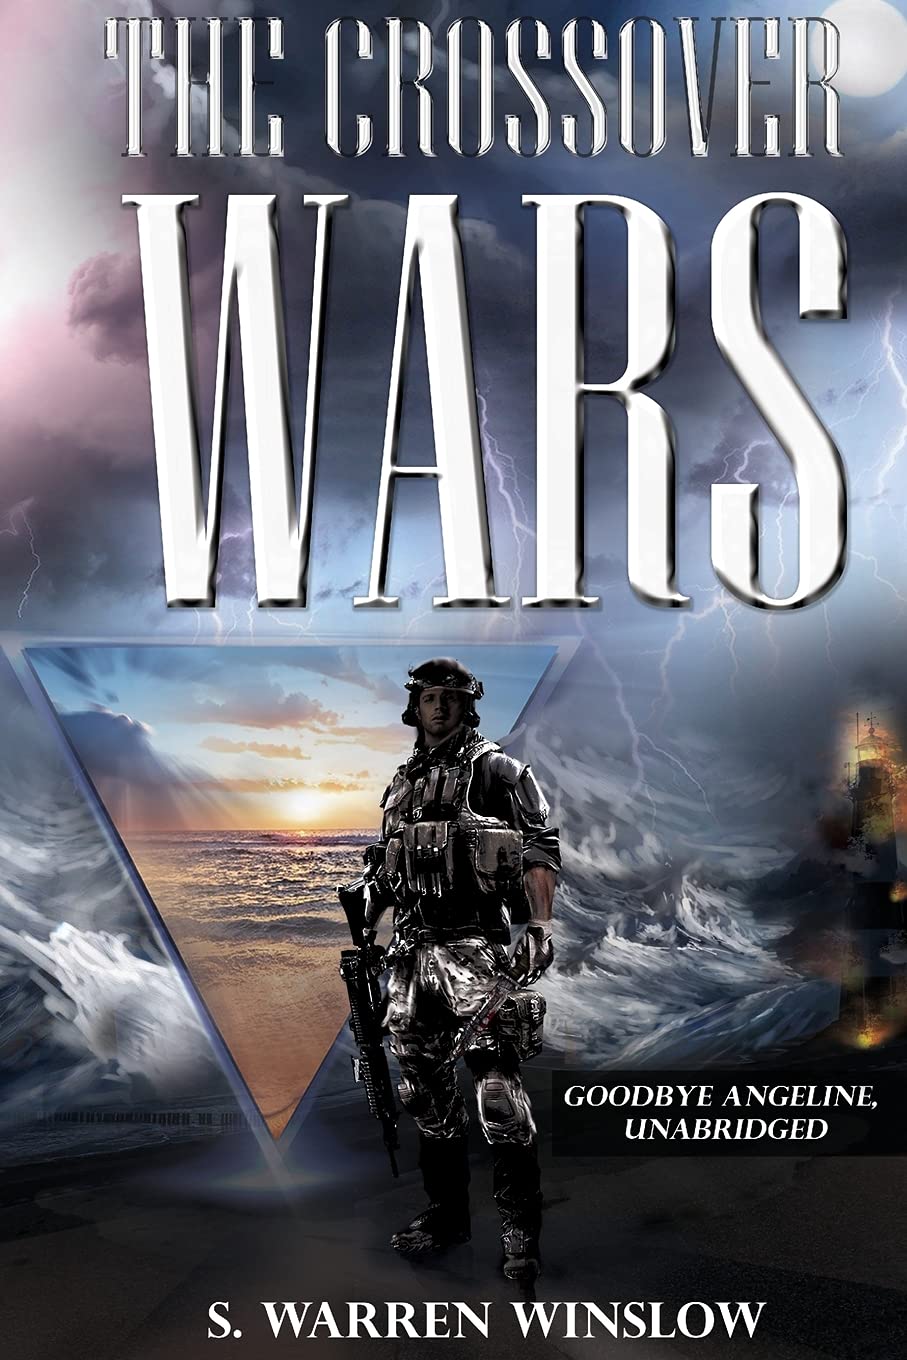 Author’s Tranquility Press Supports S. Warren Winslow’s Release of The Crossover Wars: Goodbye Angeline, Unabridged